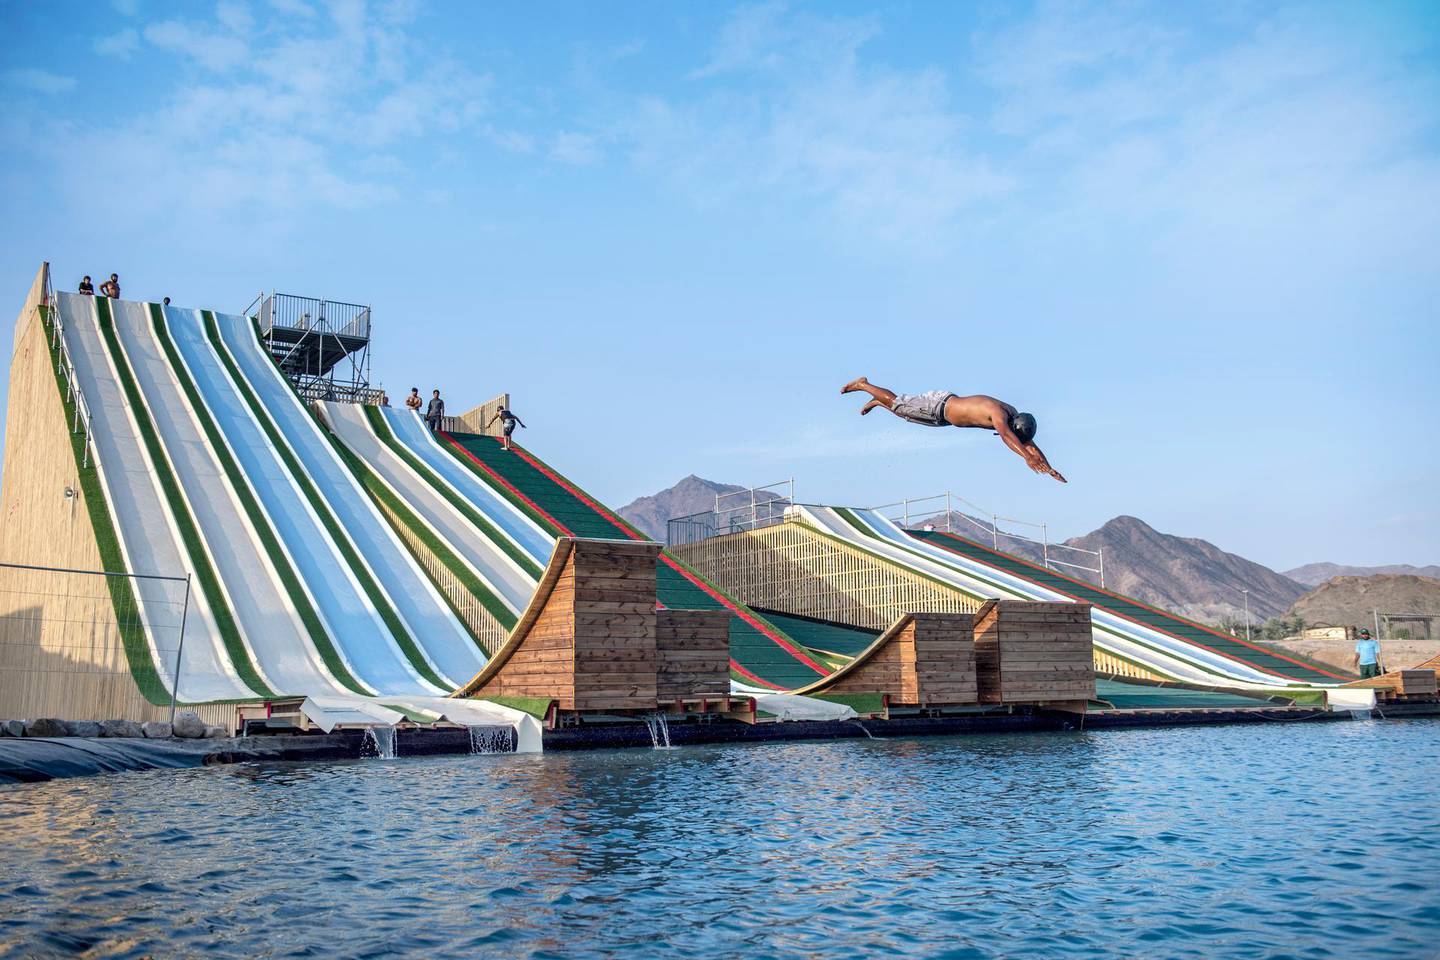 At Hatta Wadi Hub you will find Hatta Drop-in, a water jump park, with a crazy jump, crazy slide, drop-in donuts and drop-in tracks